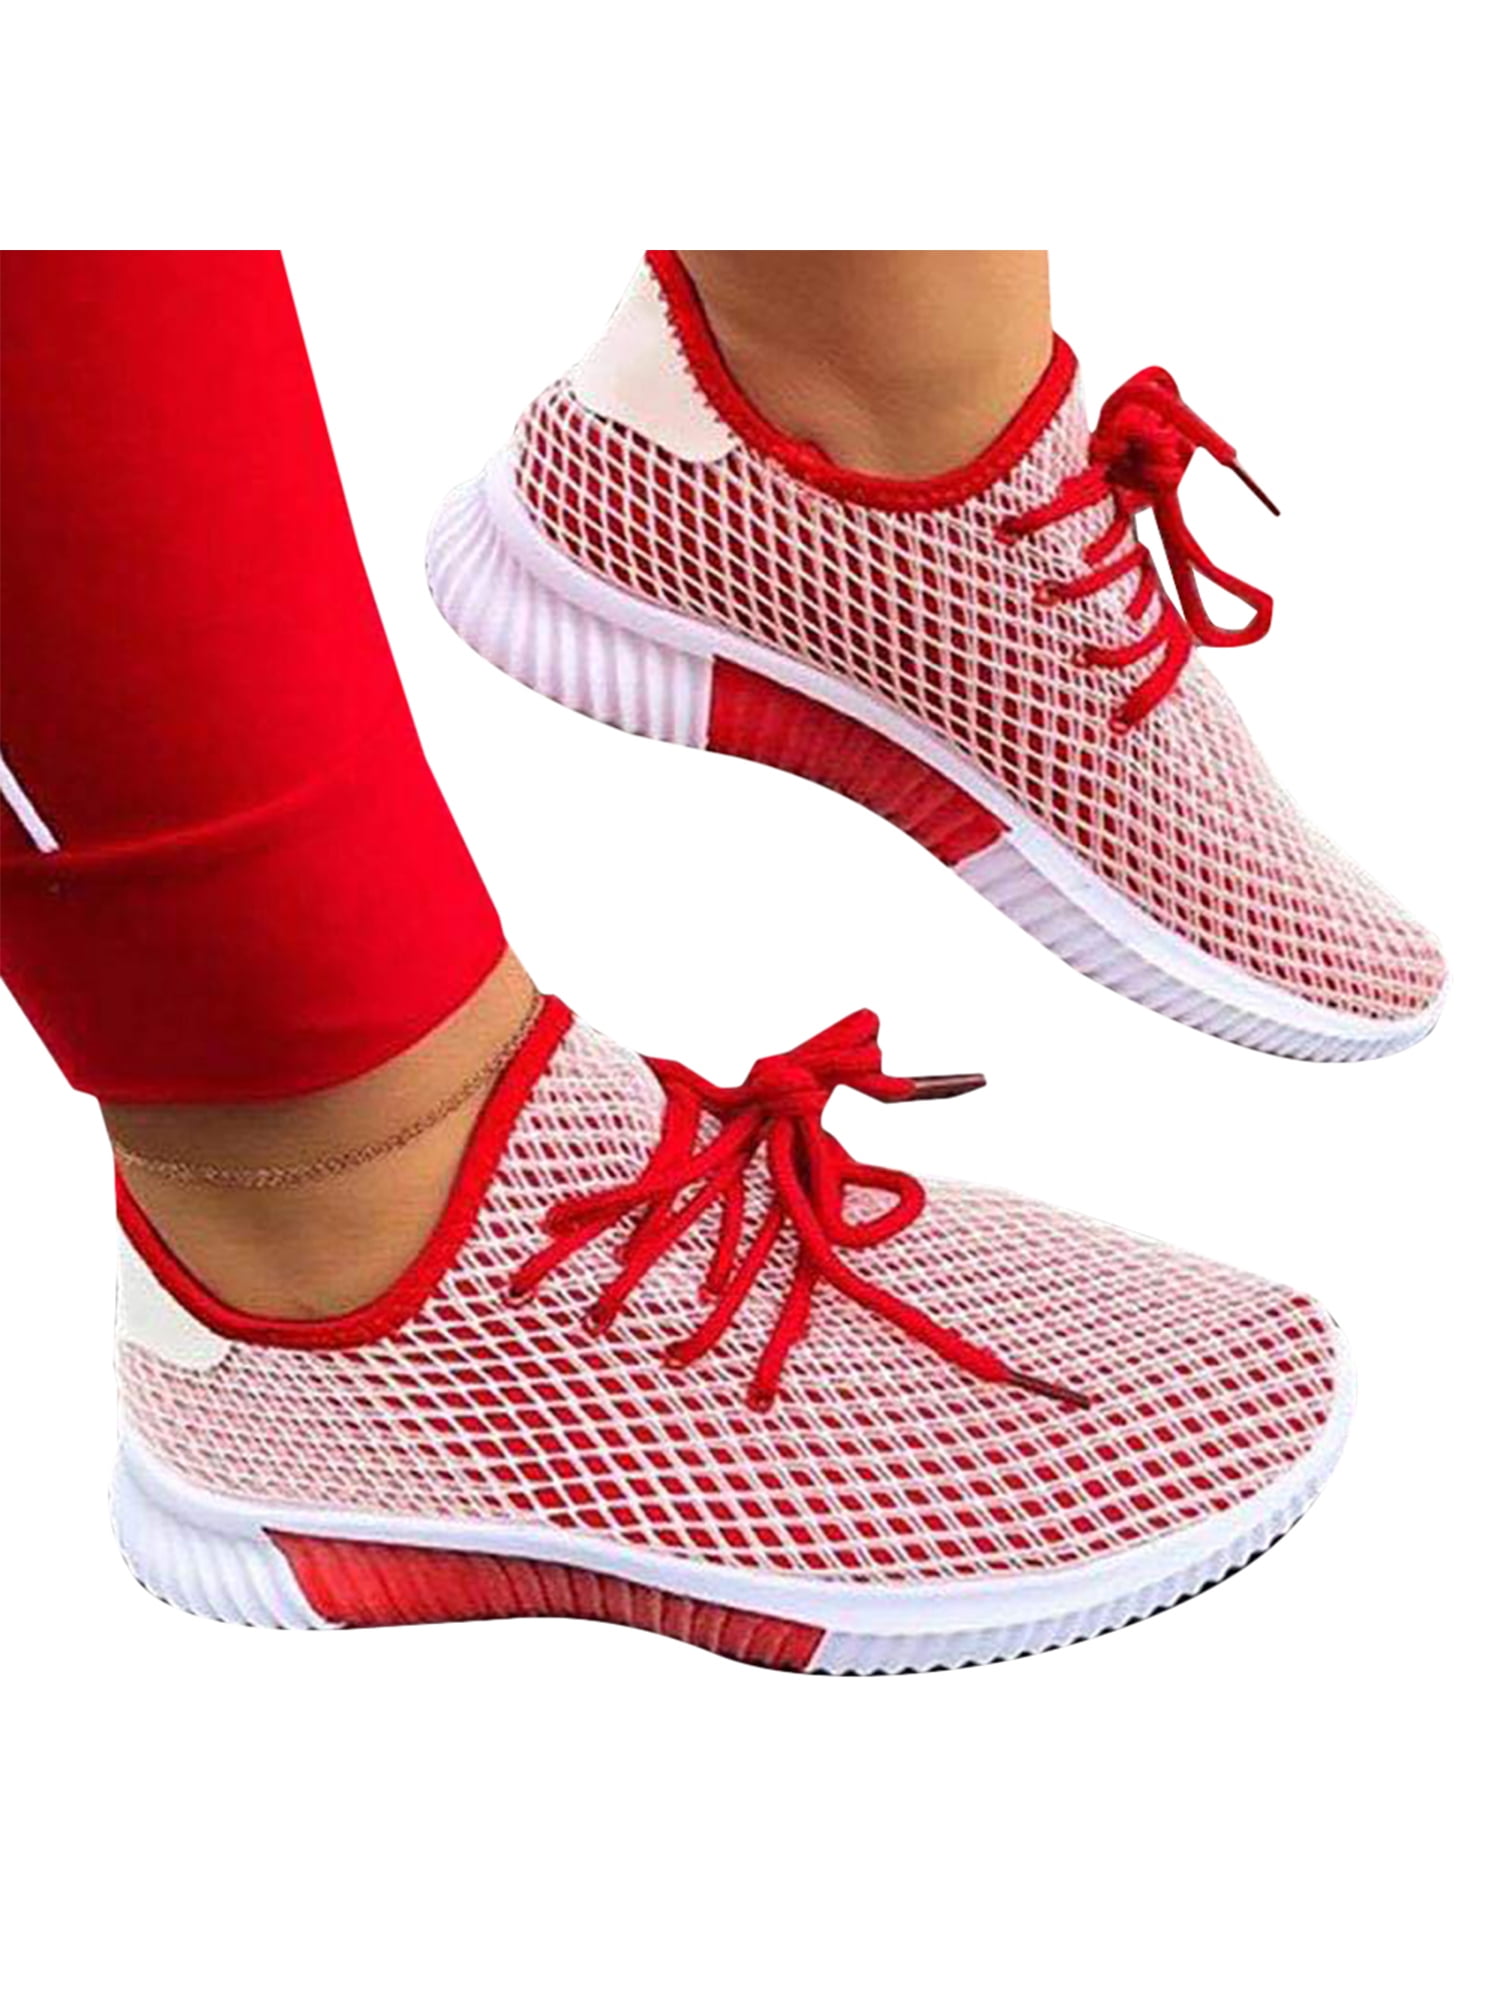 Red Ta Women Outdoor Mesh Sneakers,Ladies Casual Slip On Breathable Running Sports Shoes 